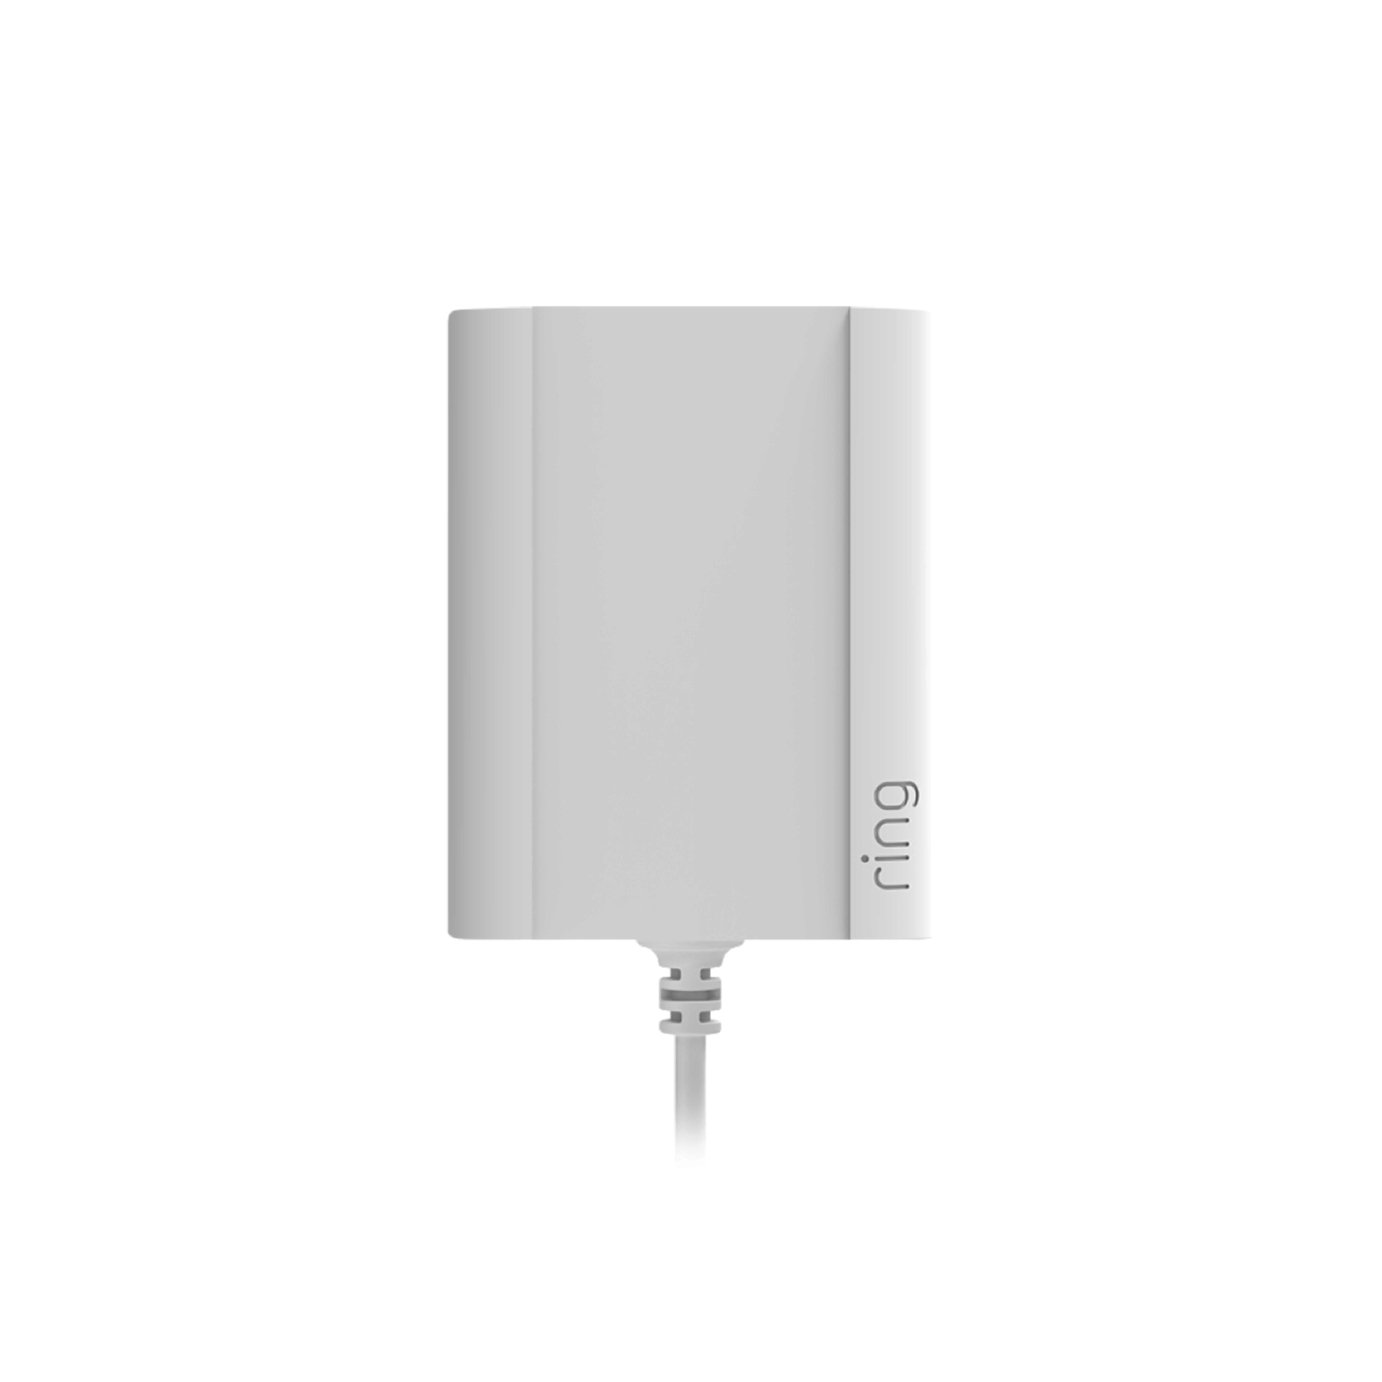 Ring 2nd Gen Plug-In Adapter